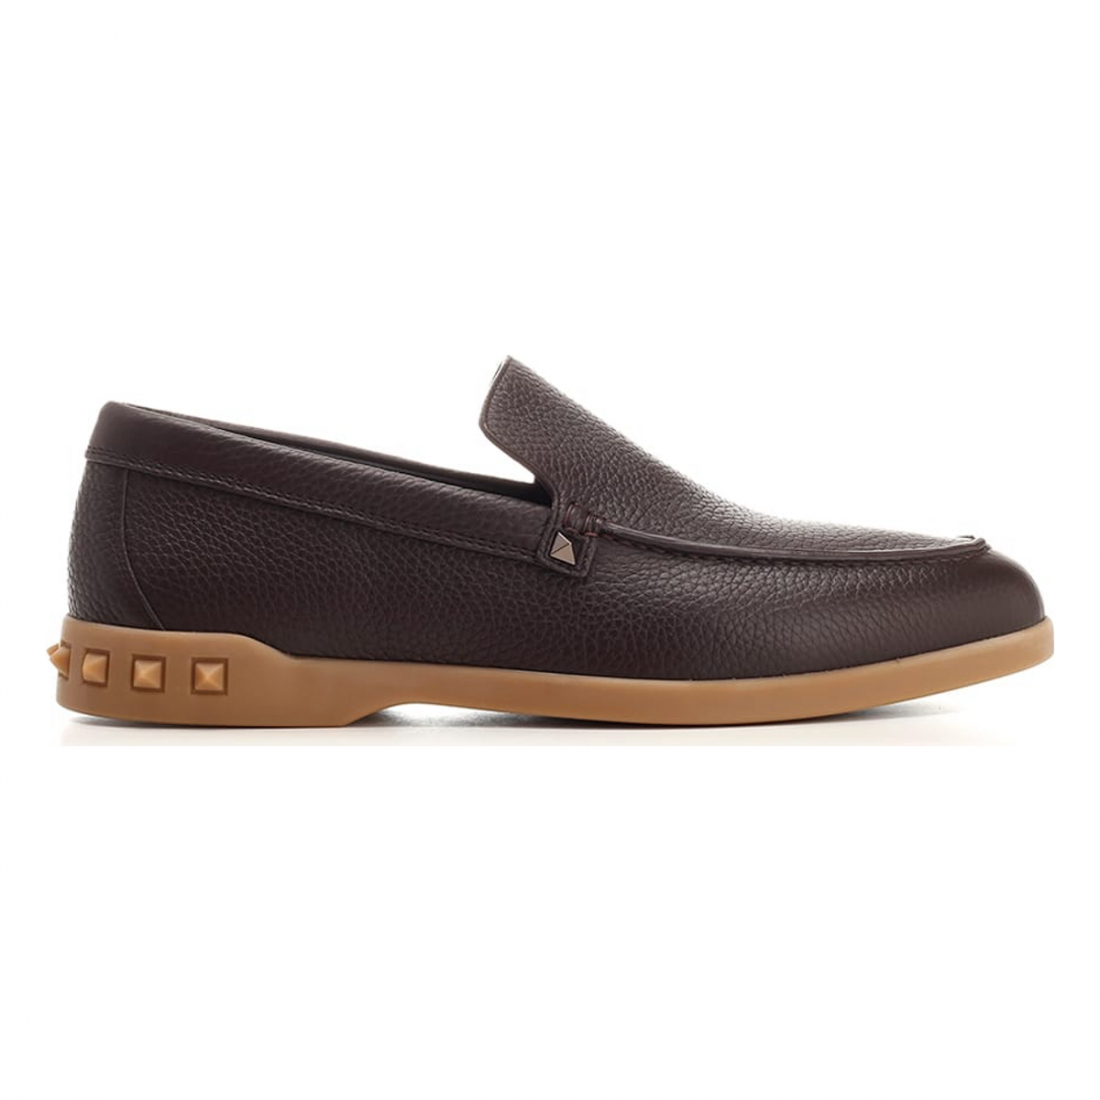 Men's 'Leisure Flows' Loafers